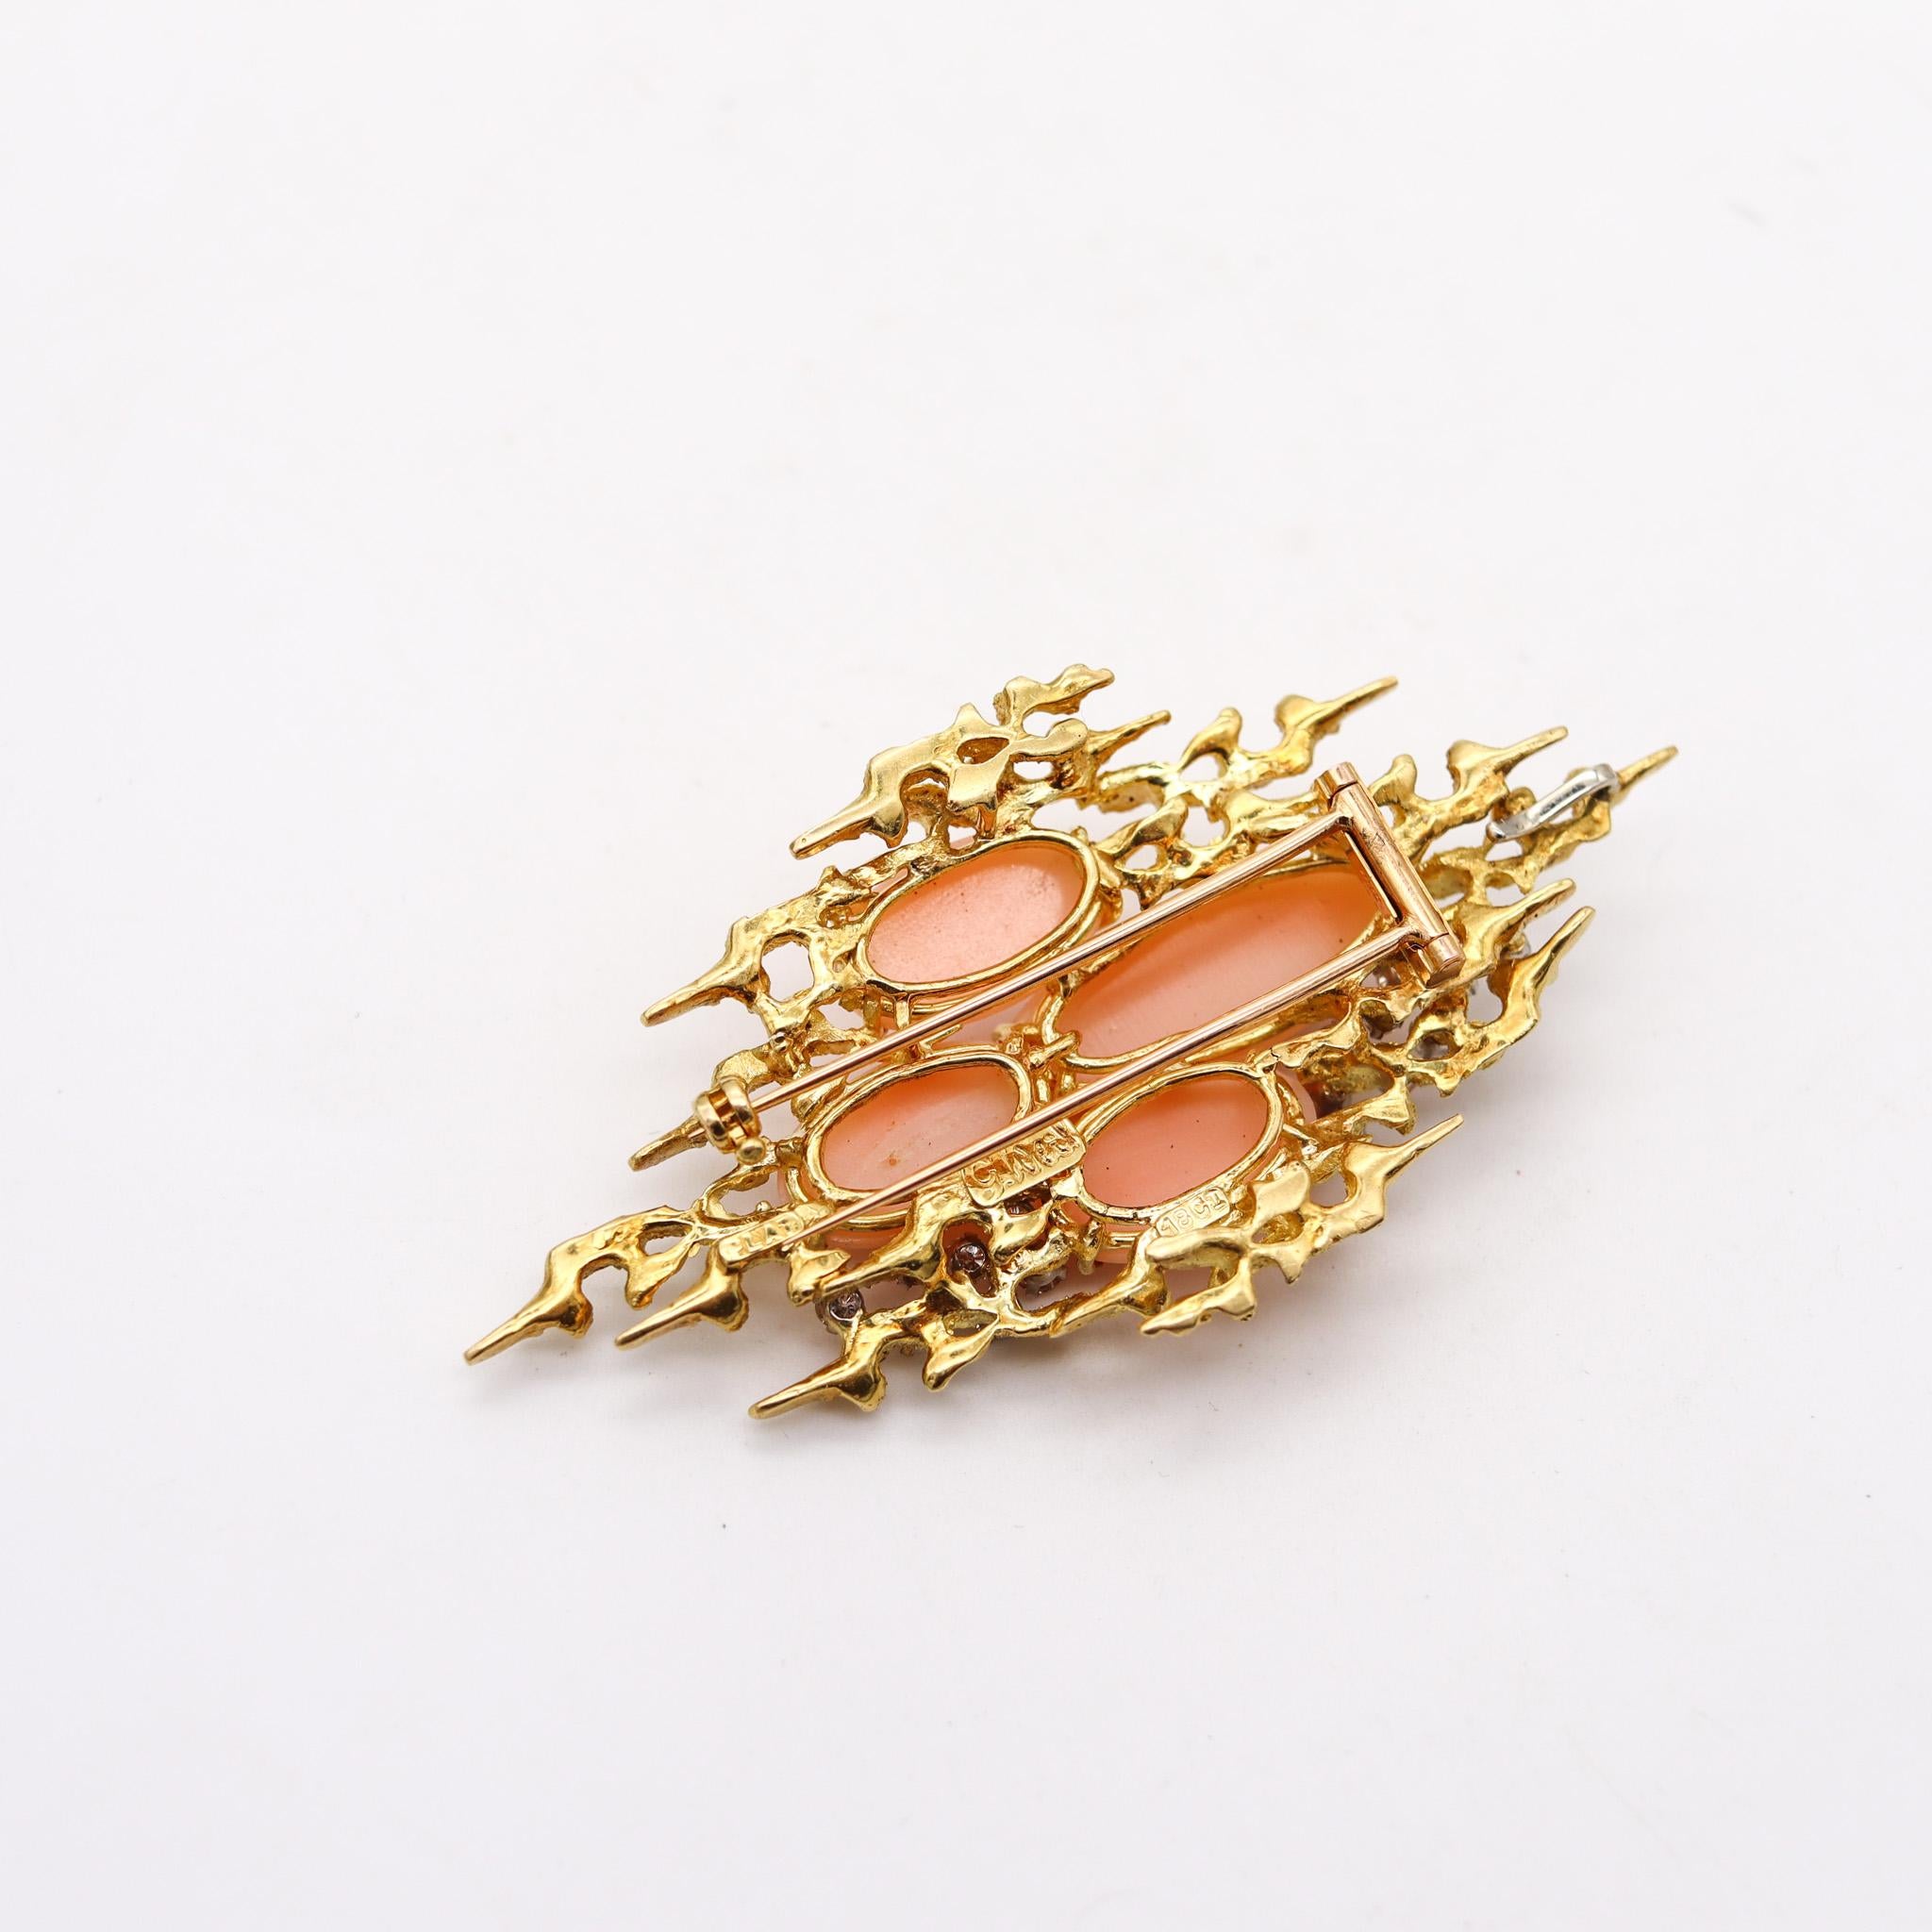 Brilliant Cut George Weil 1960 Brutalist Pendant Brooch In 18Kt Gold Diamonds And Corals For Sale